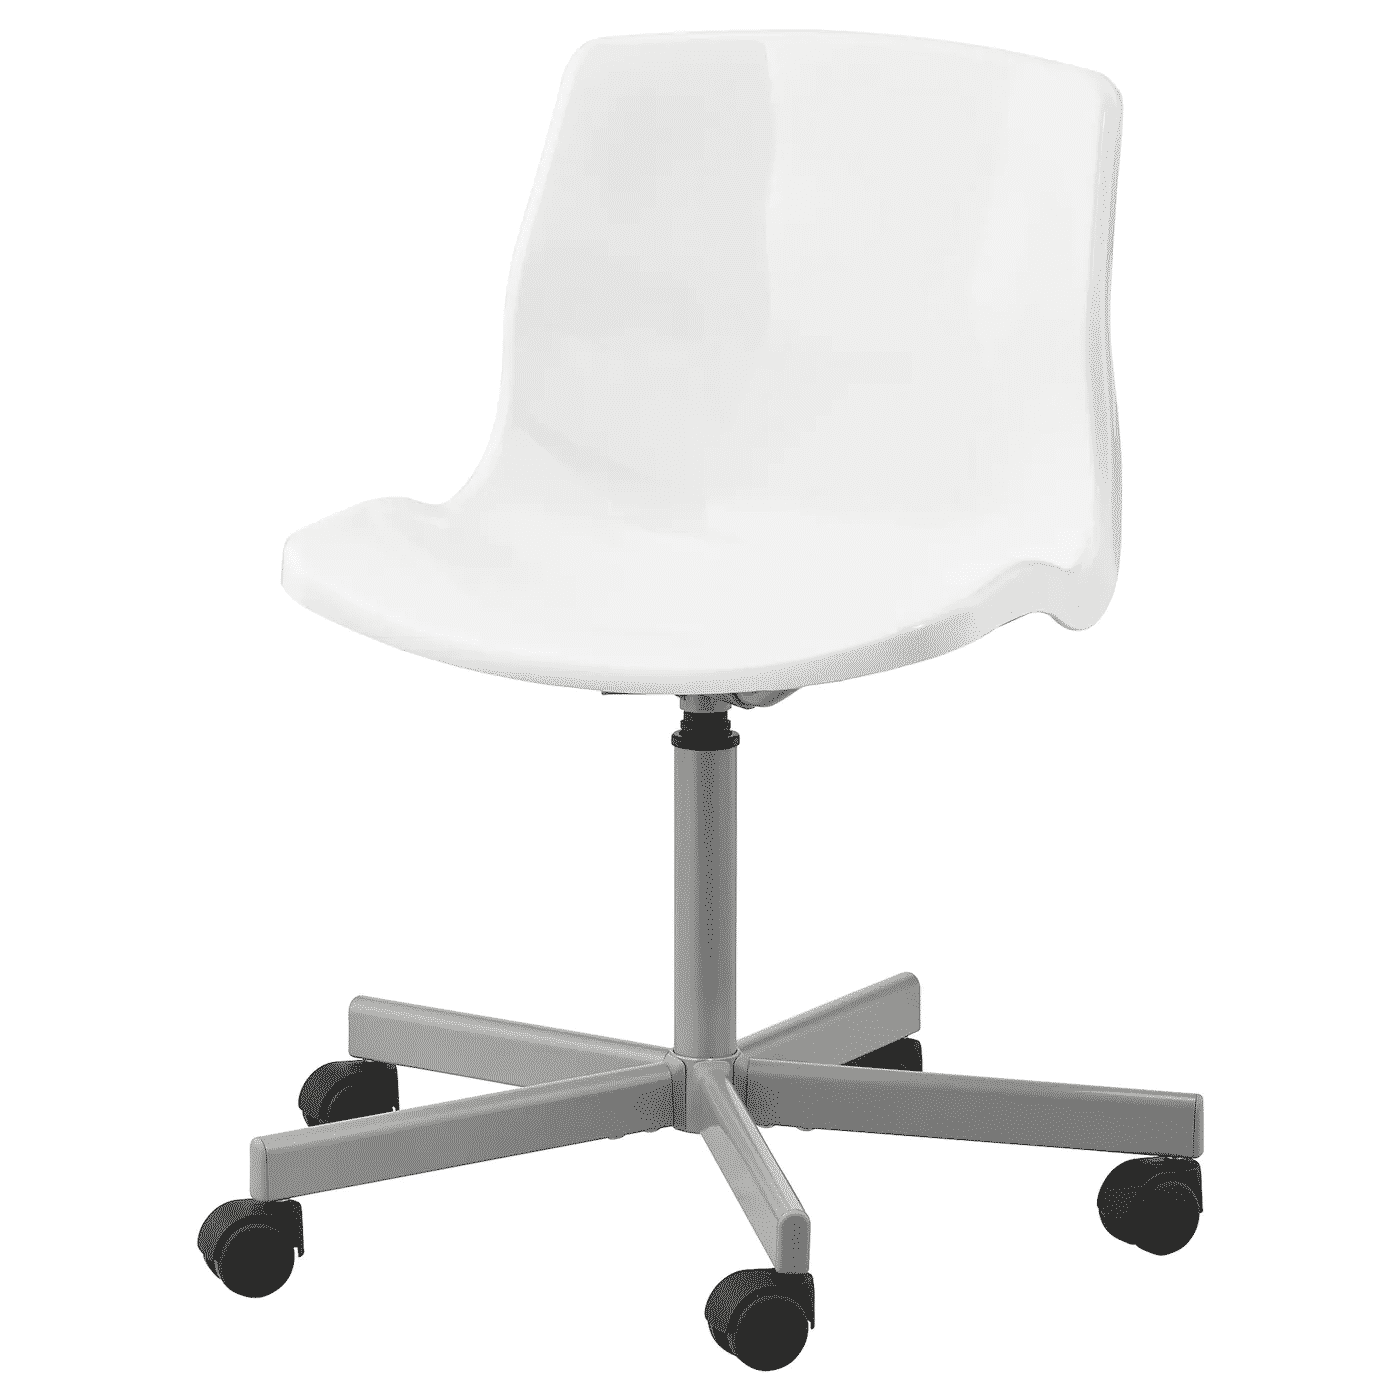 SNILLE Swivel Chair